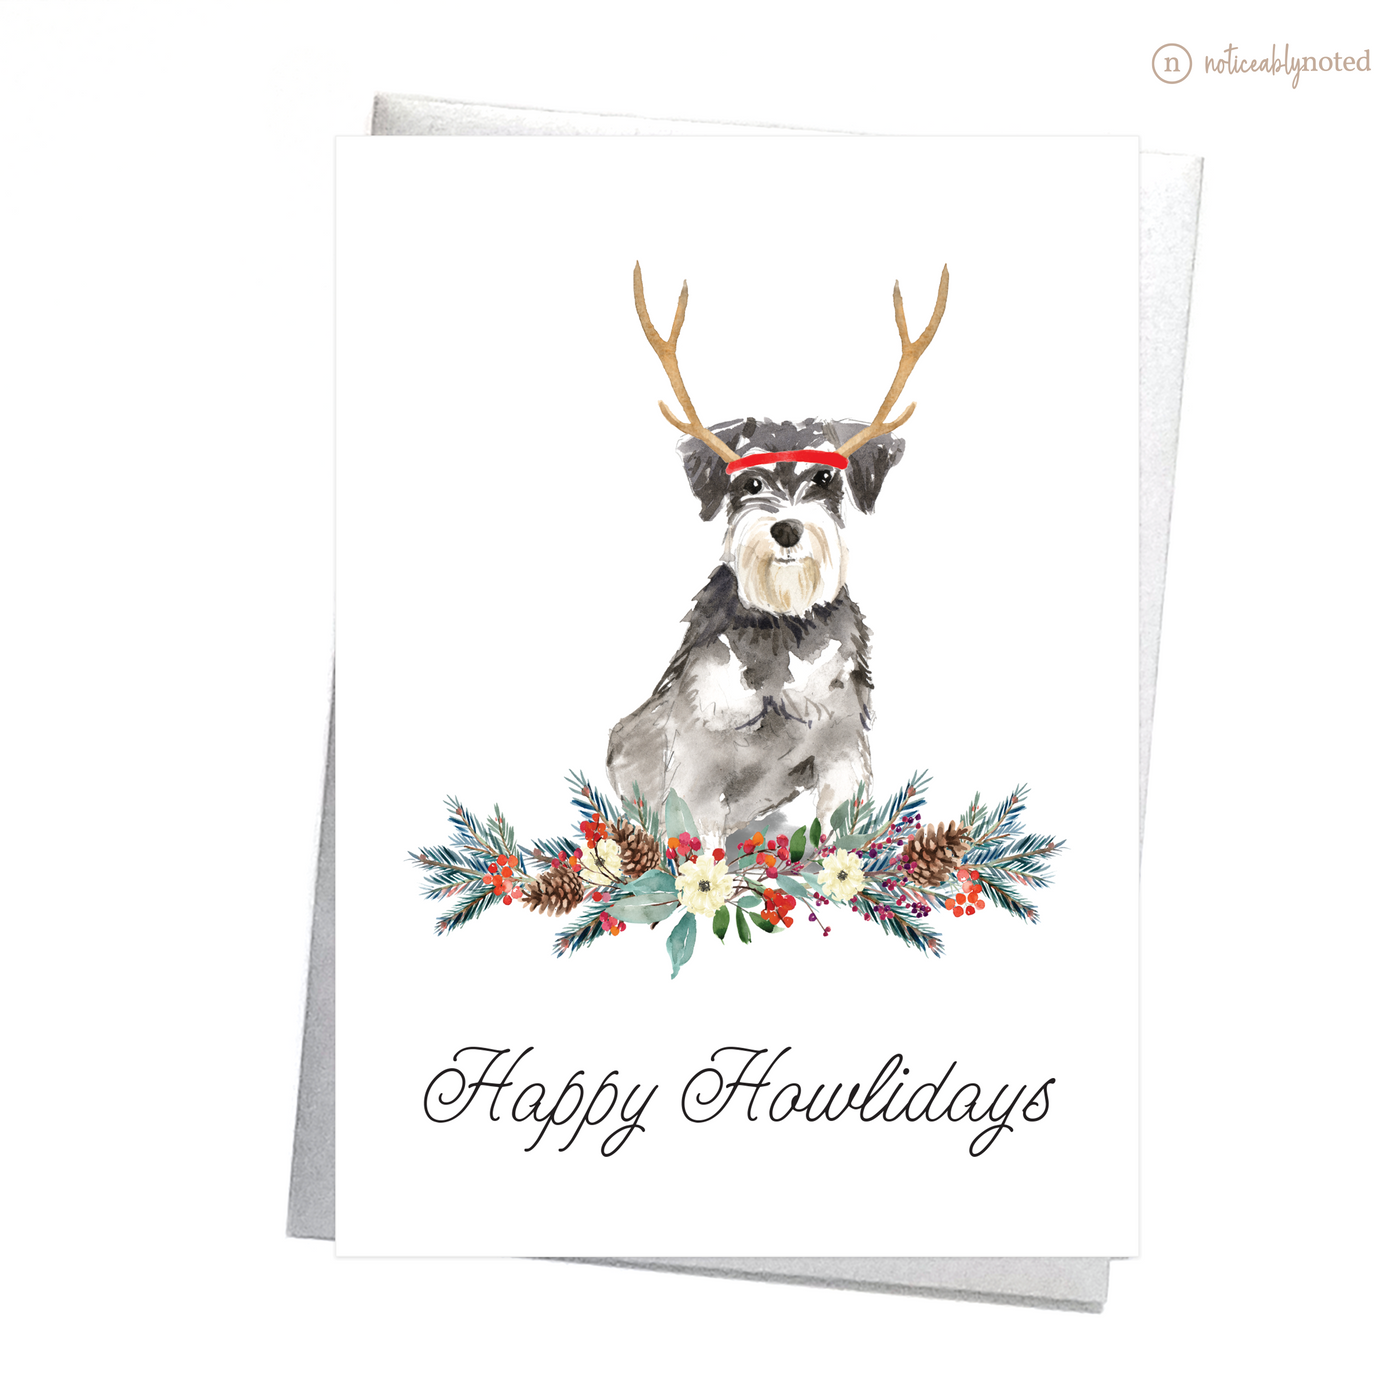 Miniature Schnauzer Dog Christmas Card | Noticeably Noted